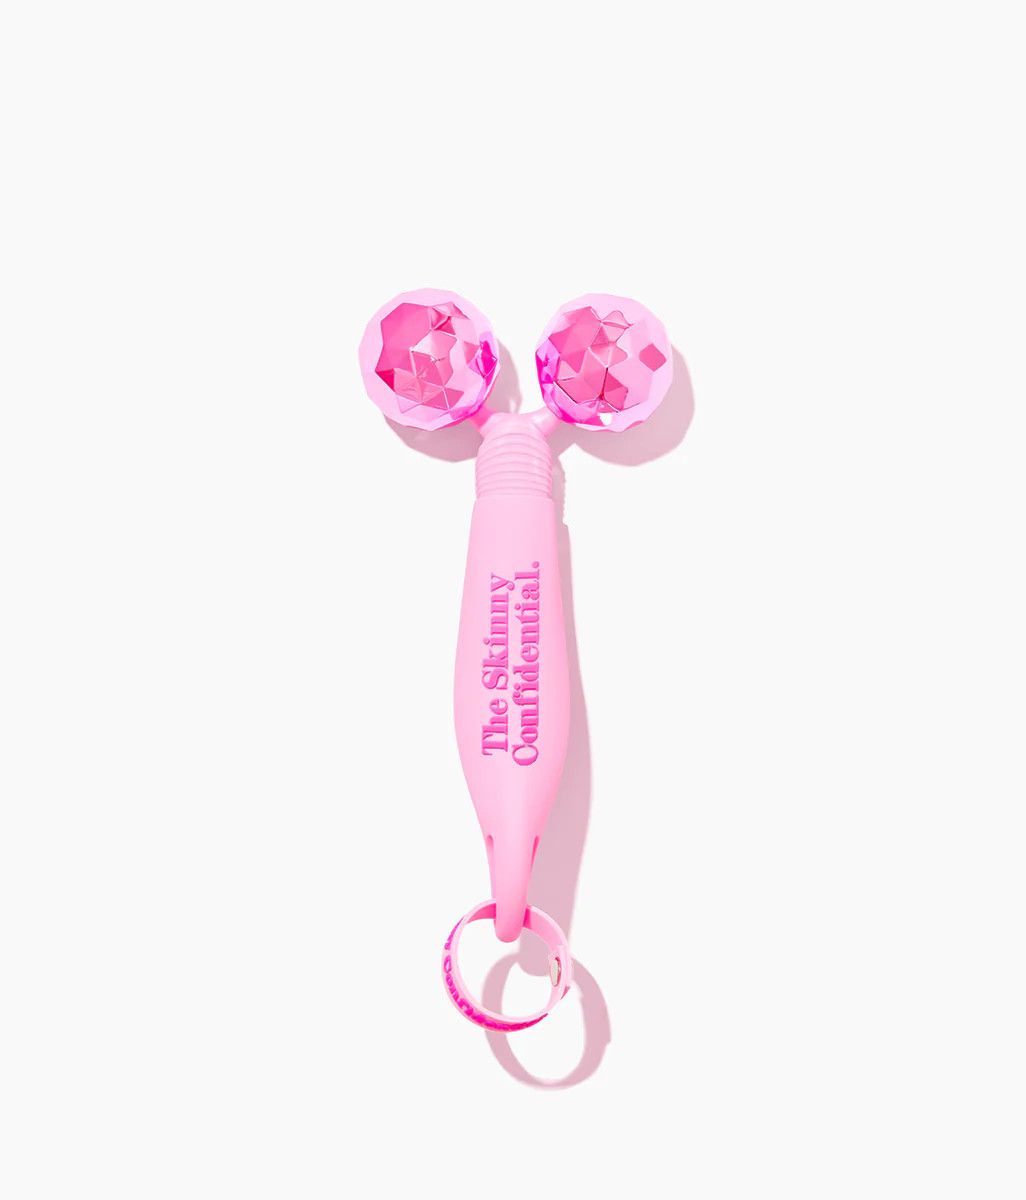 PINK BALLS FACE MASSAGER | The Skinny Confidential